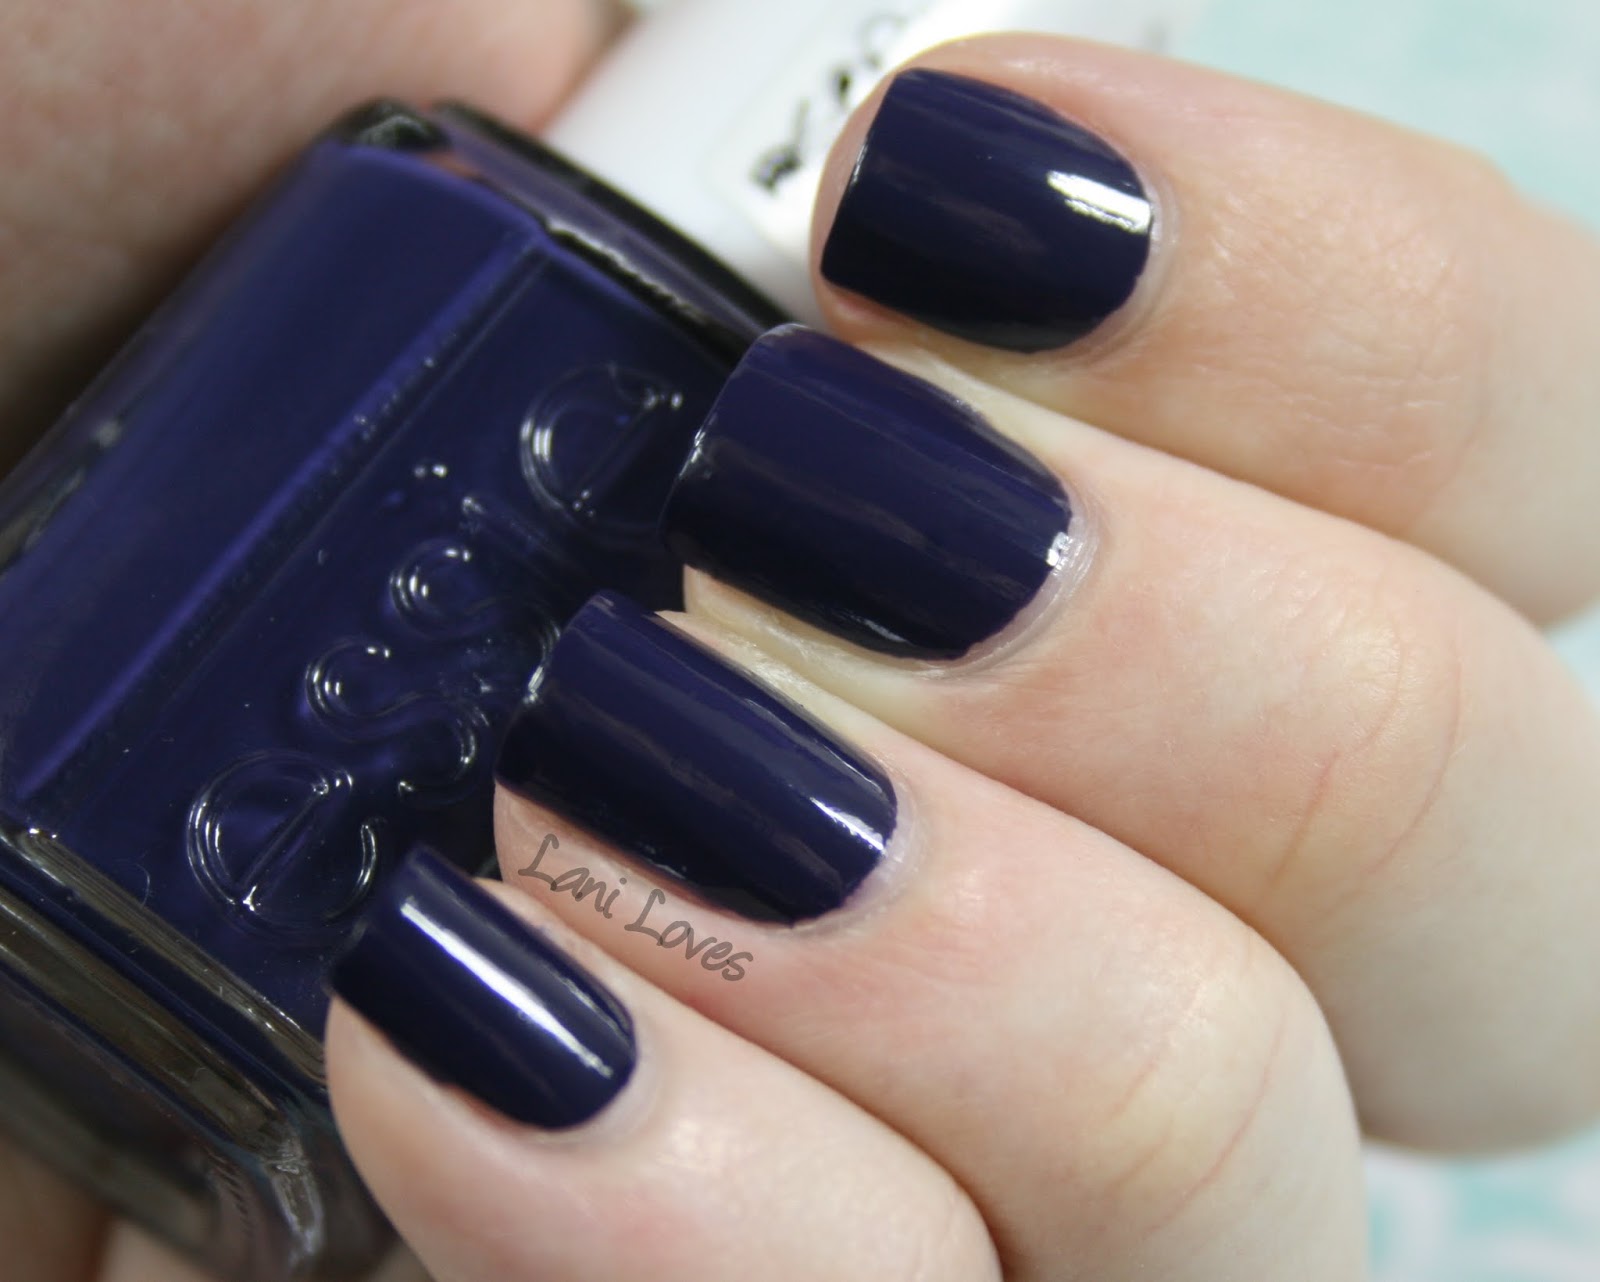 Essie No More Film Swatches & Review